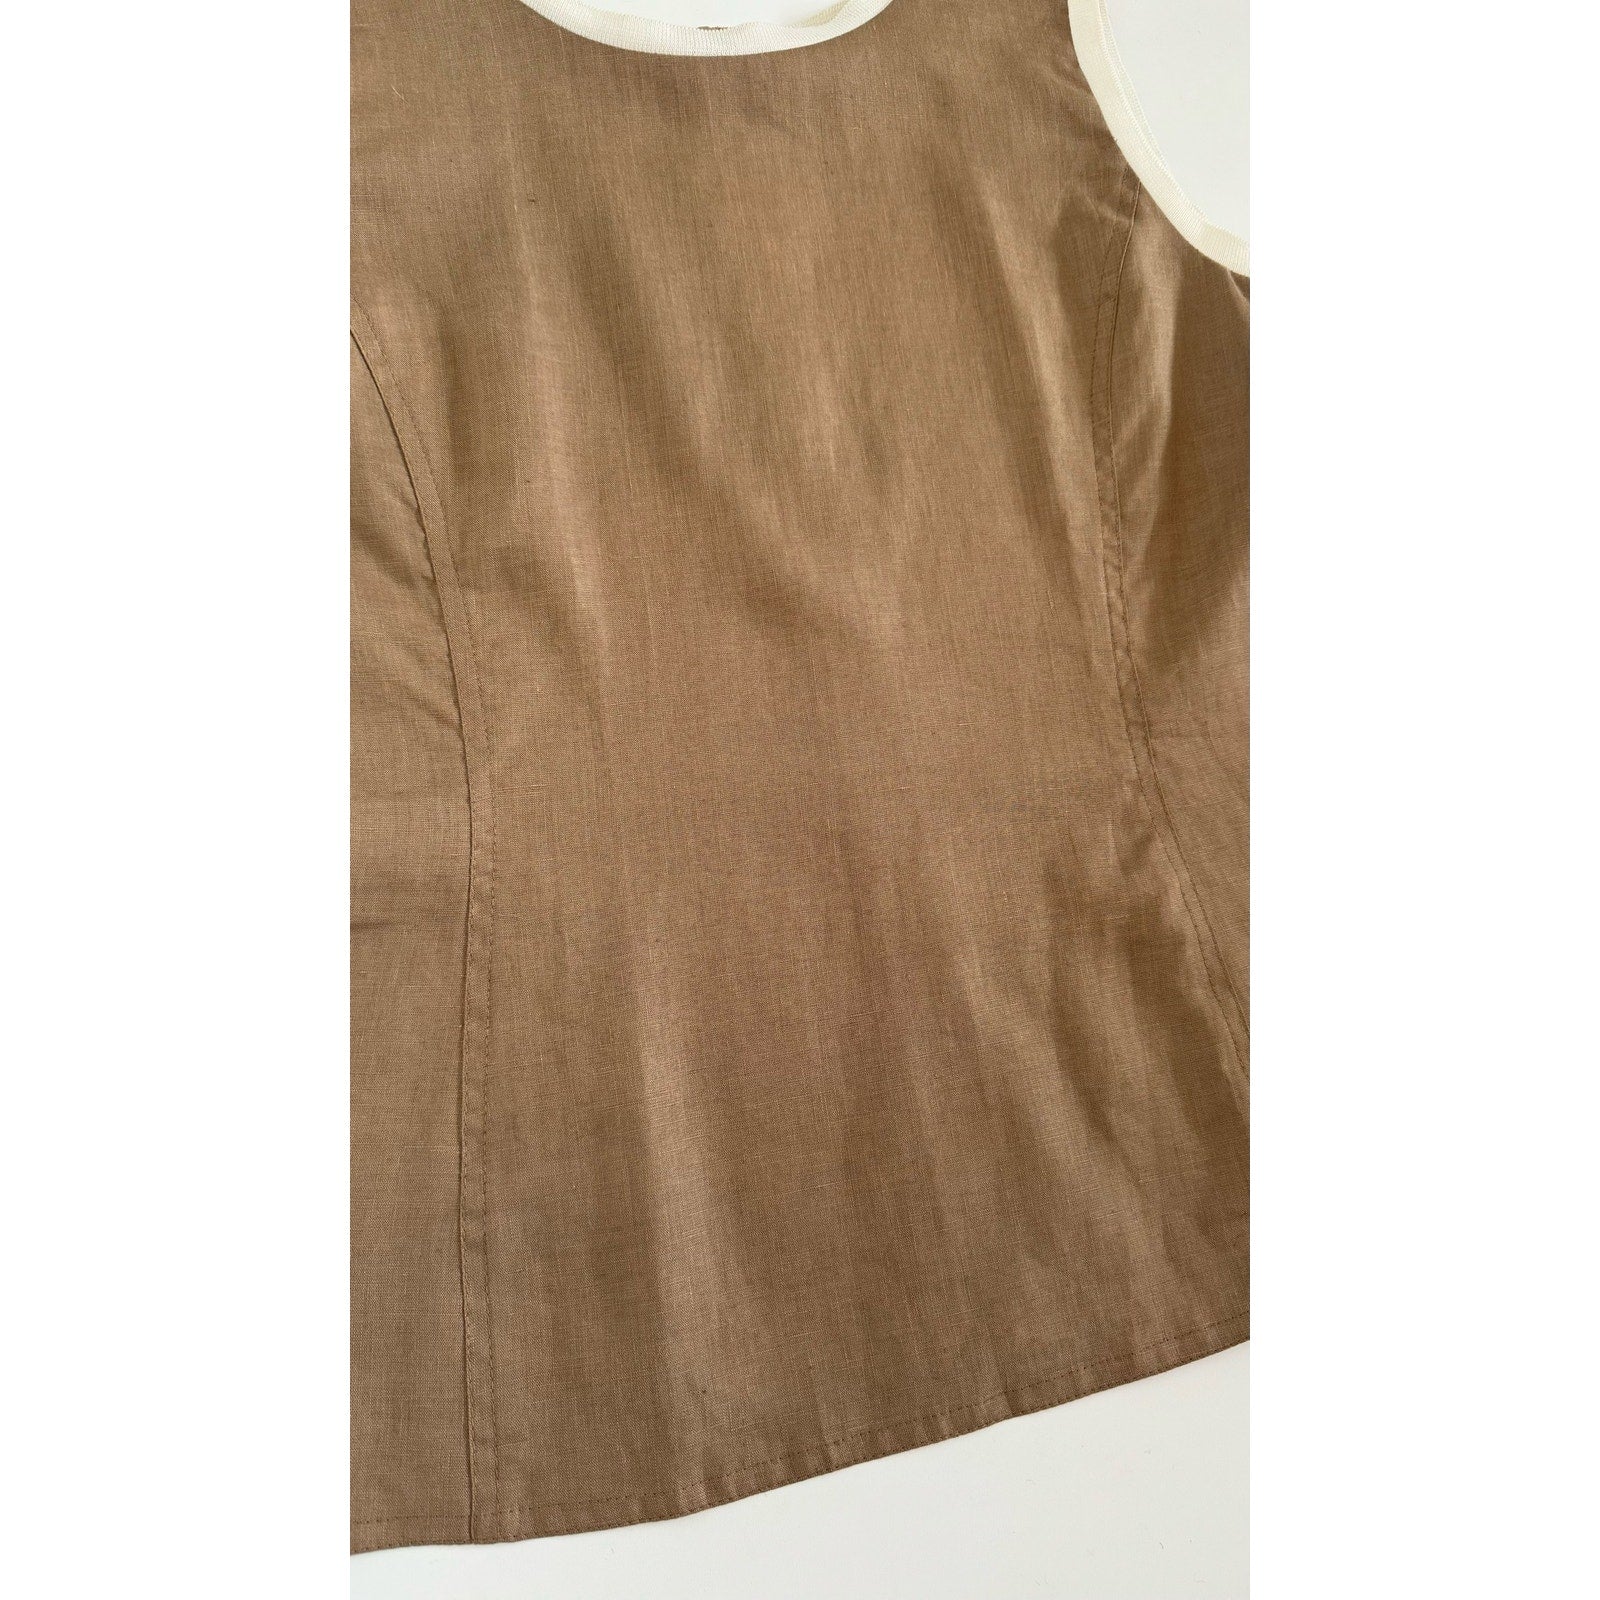 A sleeveless brown blouse with white trim around the collar and armholes. Made from 100% linen, the fabric appears to be lightweight and slightly textured. Perfect as a summer top, the Valentino Miss V Linen Tank Top has a simple, elegant design reminiscent of vintage Valentino Miss V.